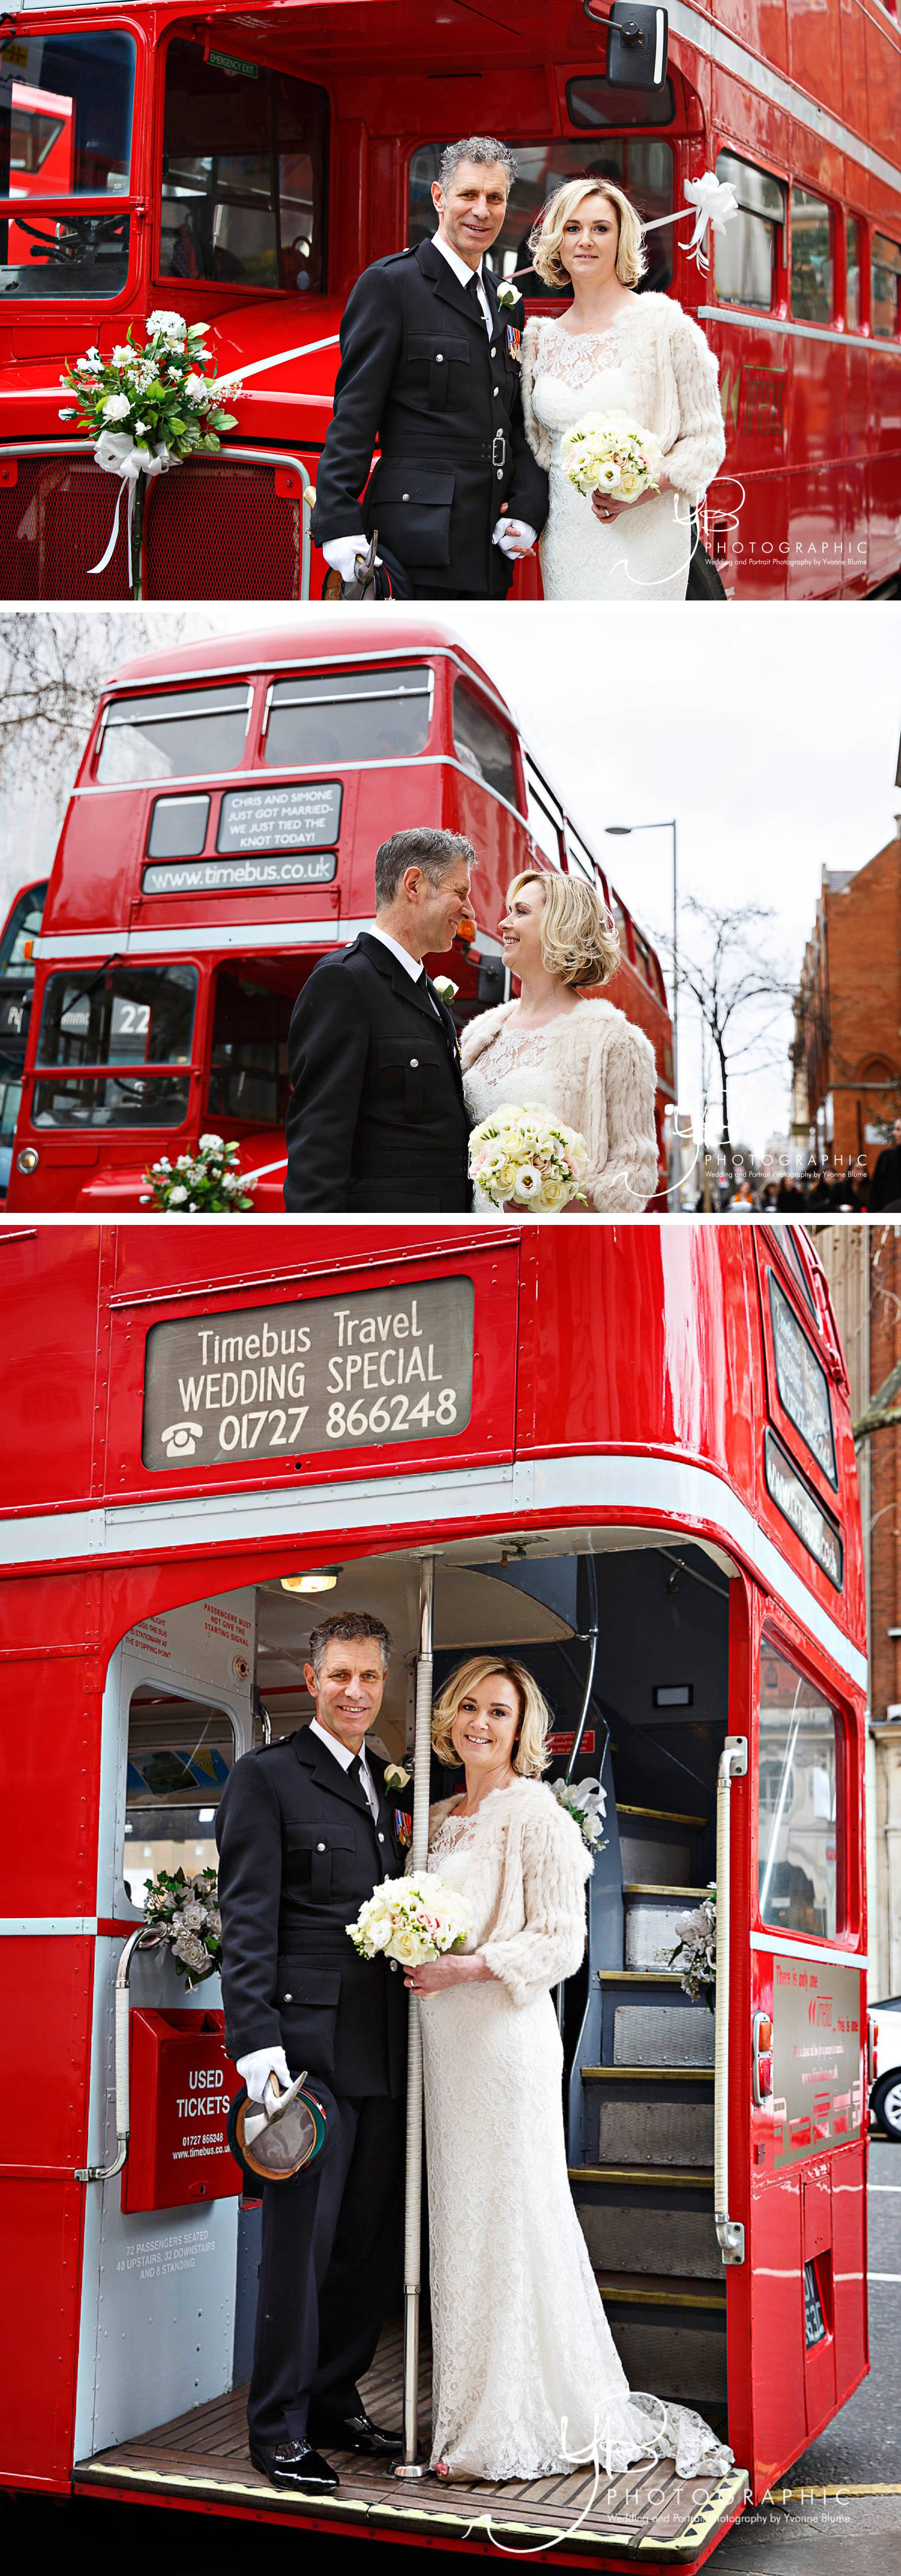 This wedding couple at Chelsea Register Office booked a classic London Routemaster Bus to take them to their wedding reception.